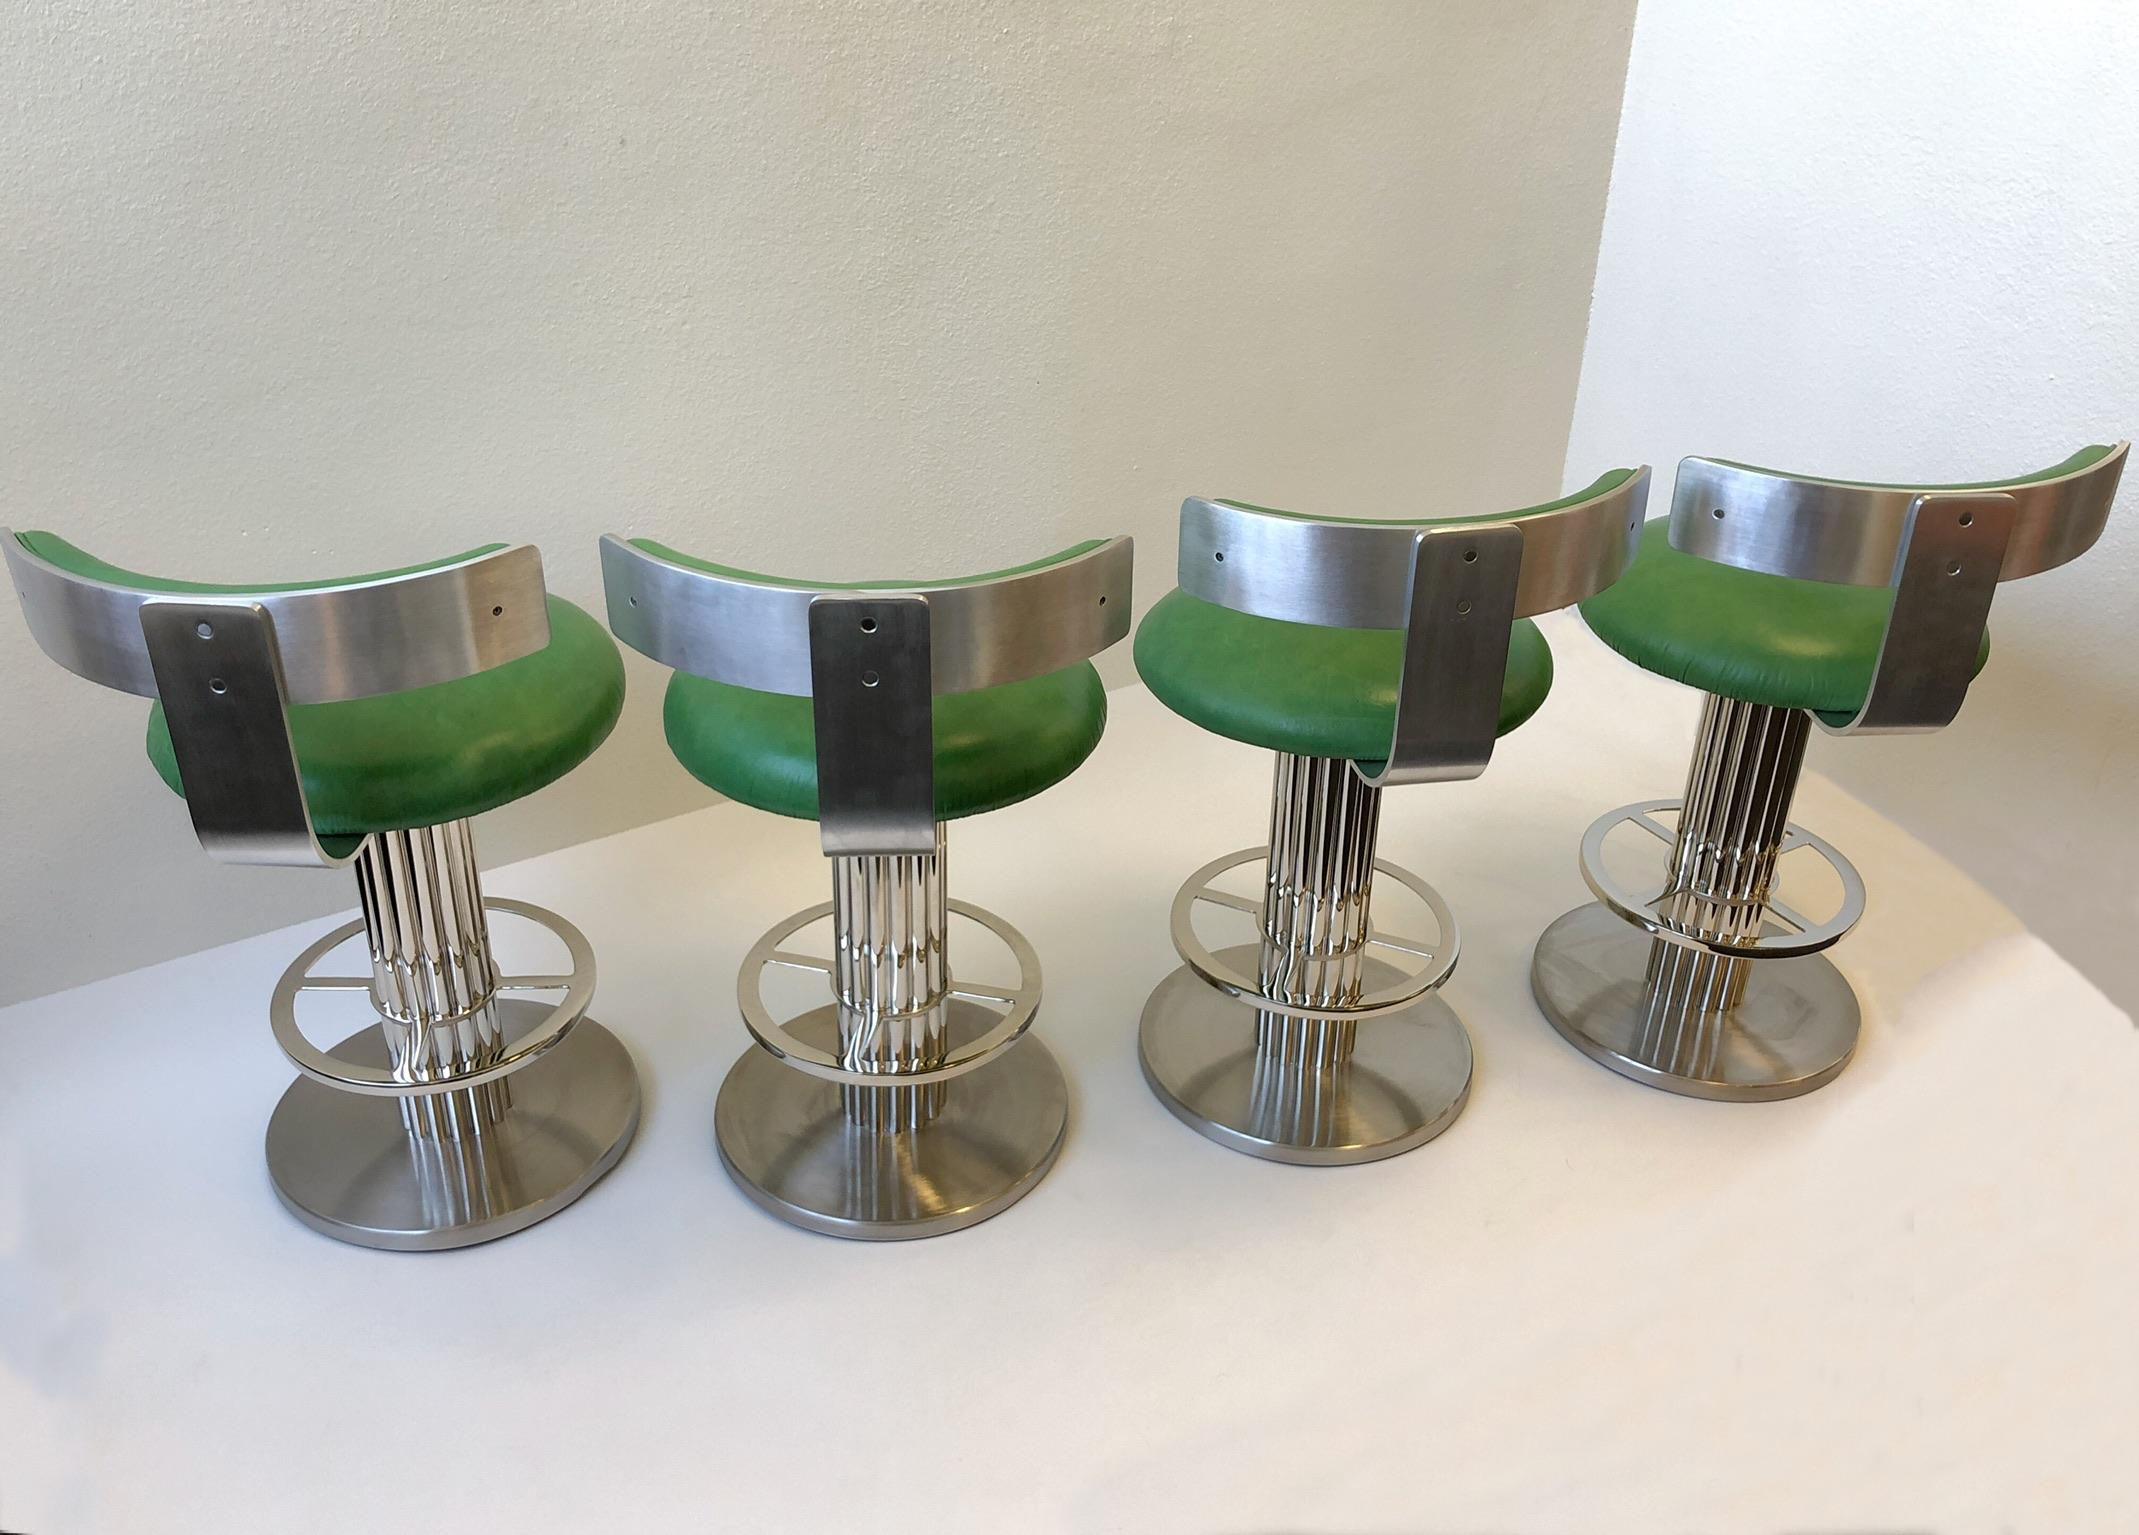 Modern Set of Four Chrome and Leather Swivel Barstools by Design for Leisure Ltd